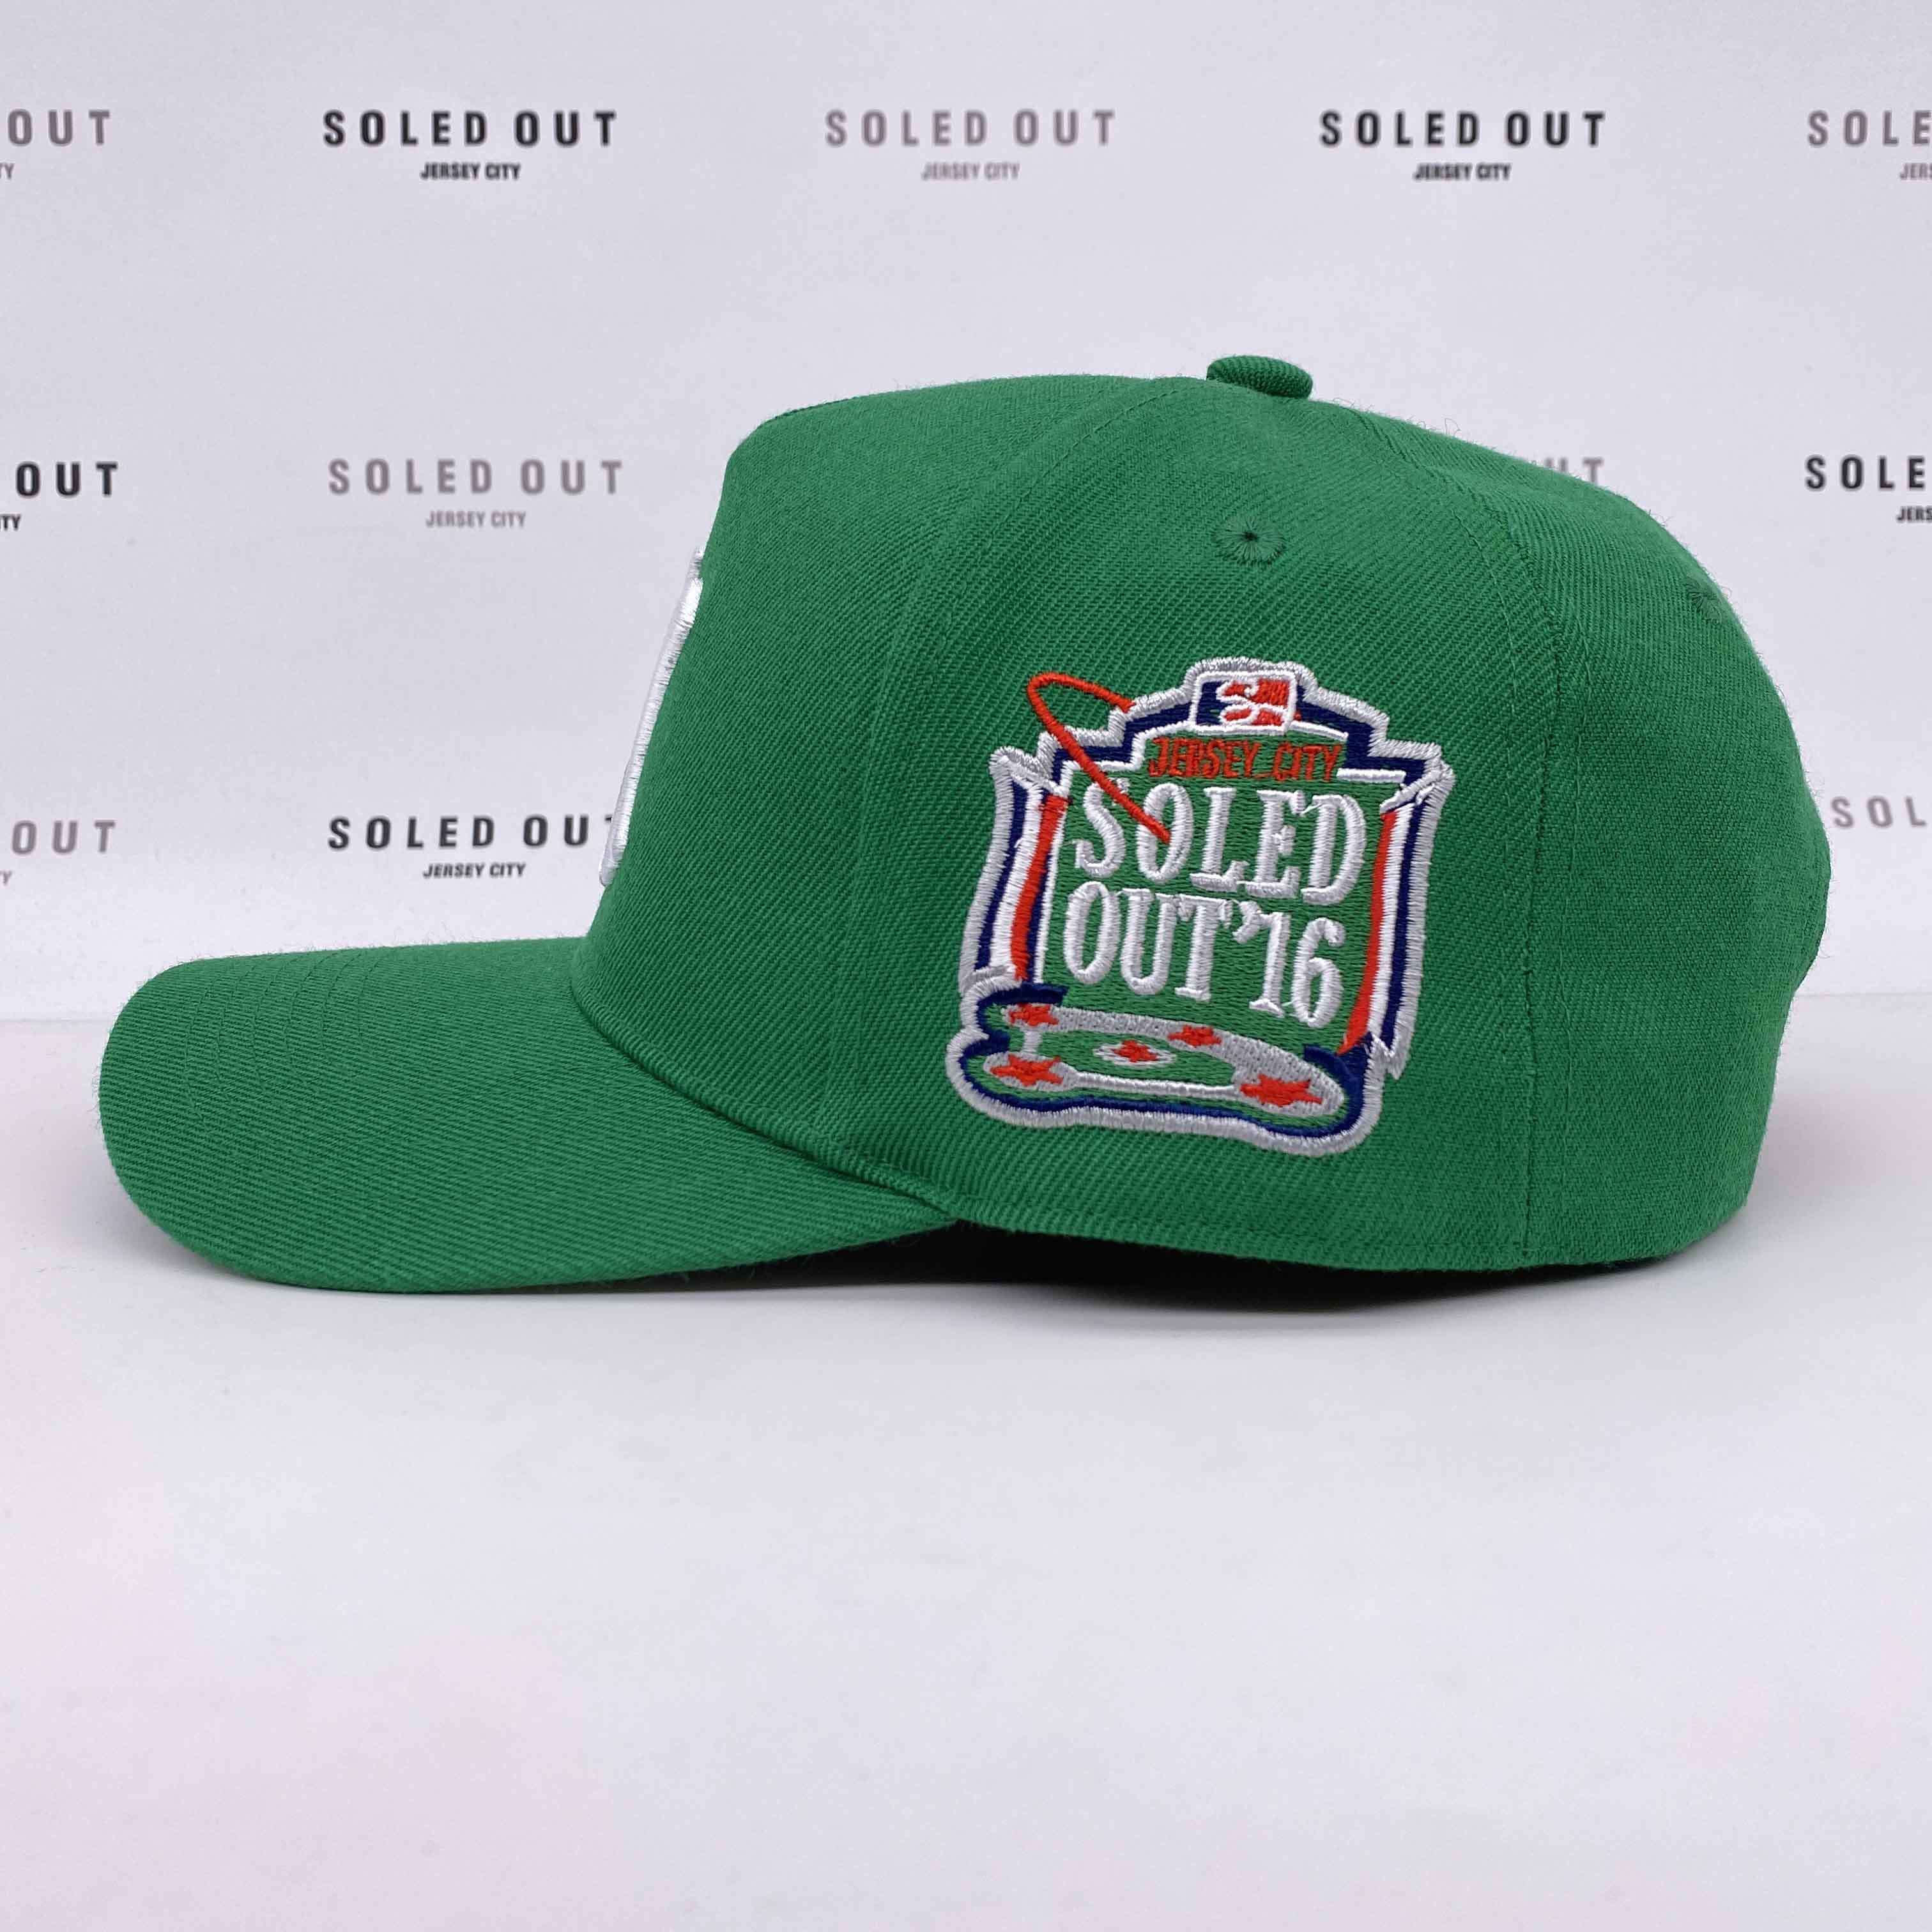 Soled Out Snapback &quot;ACRYLIC WOOL BLEND&quot; New Green Size OS